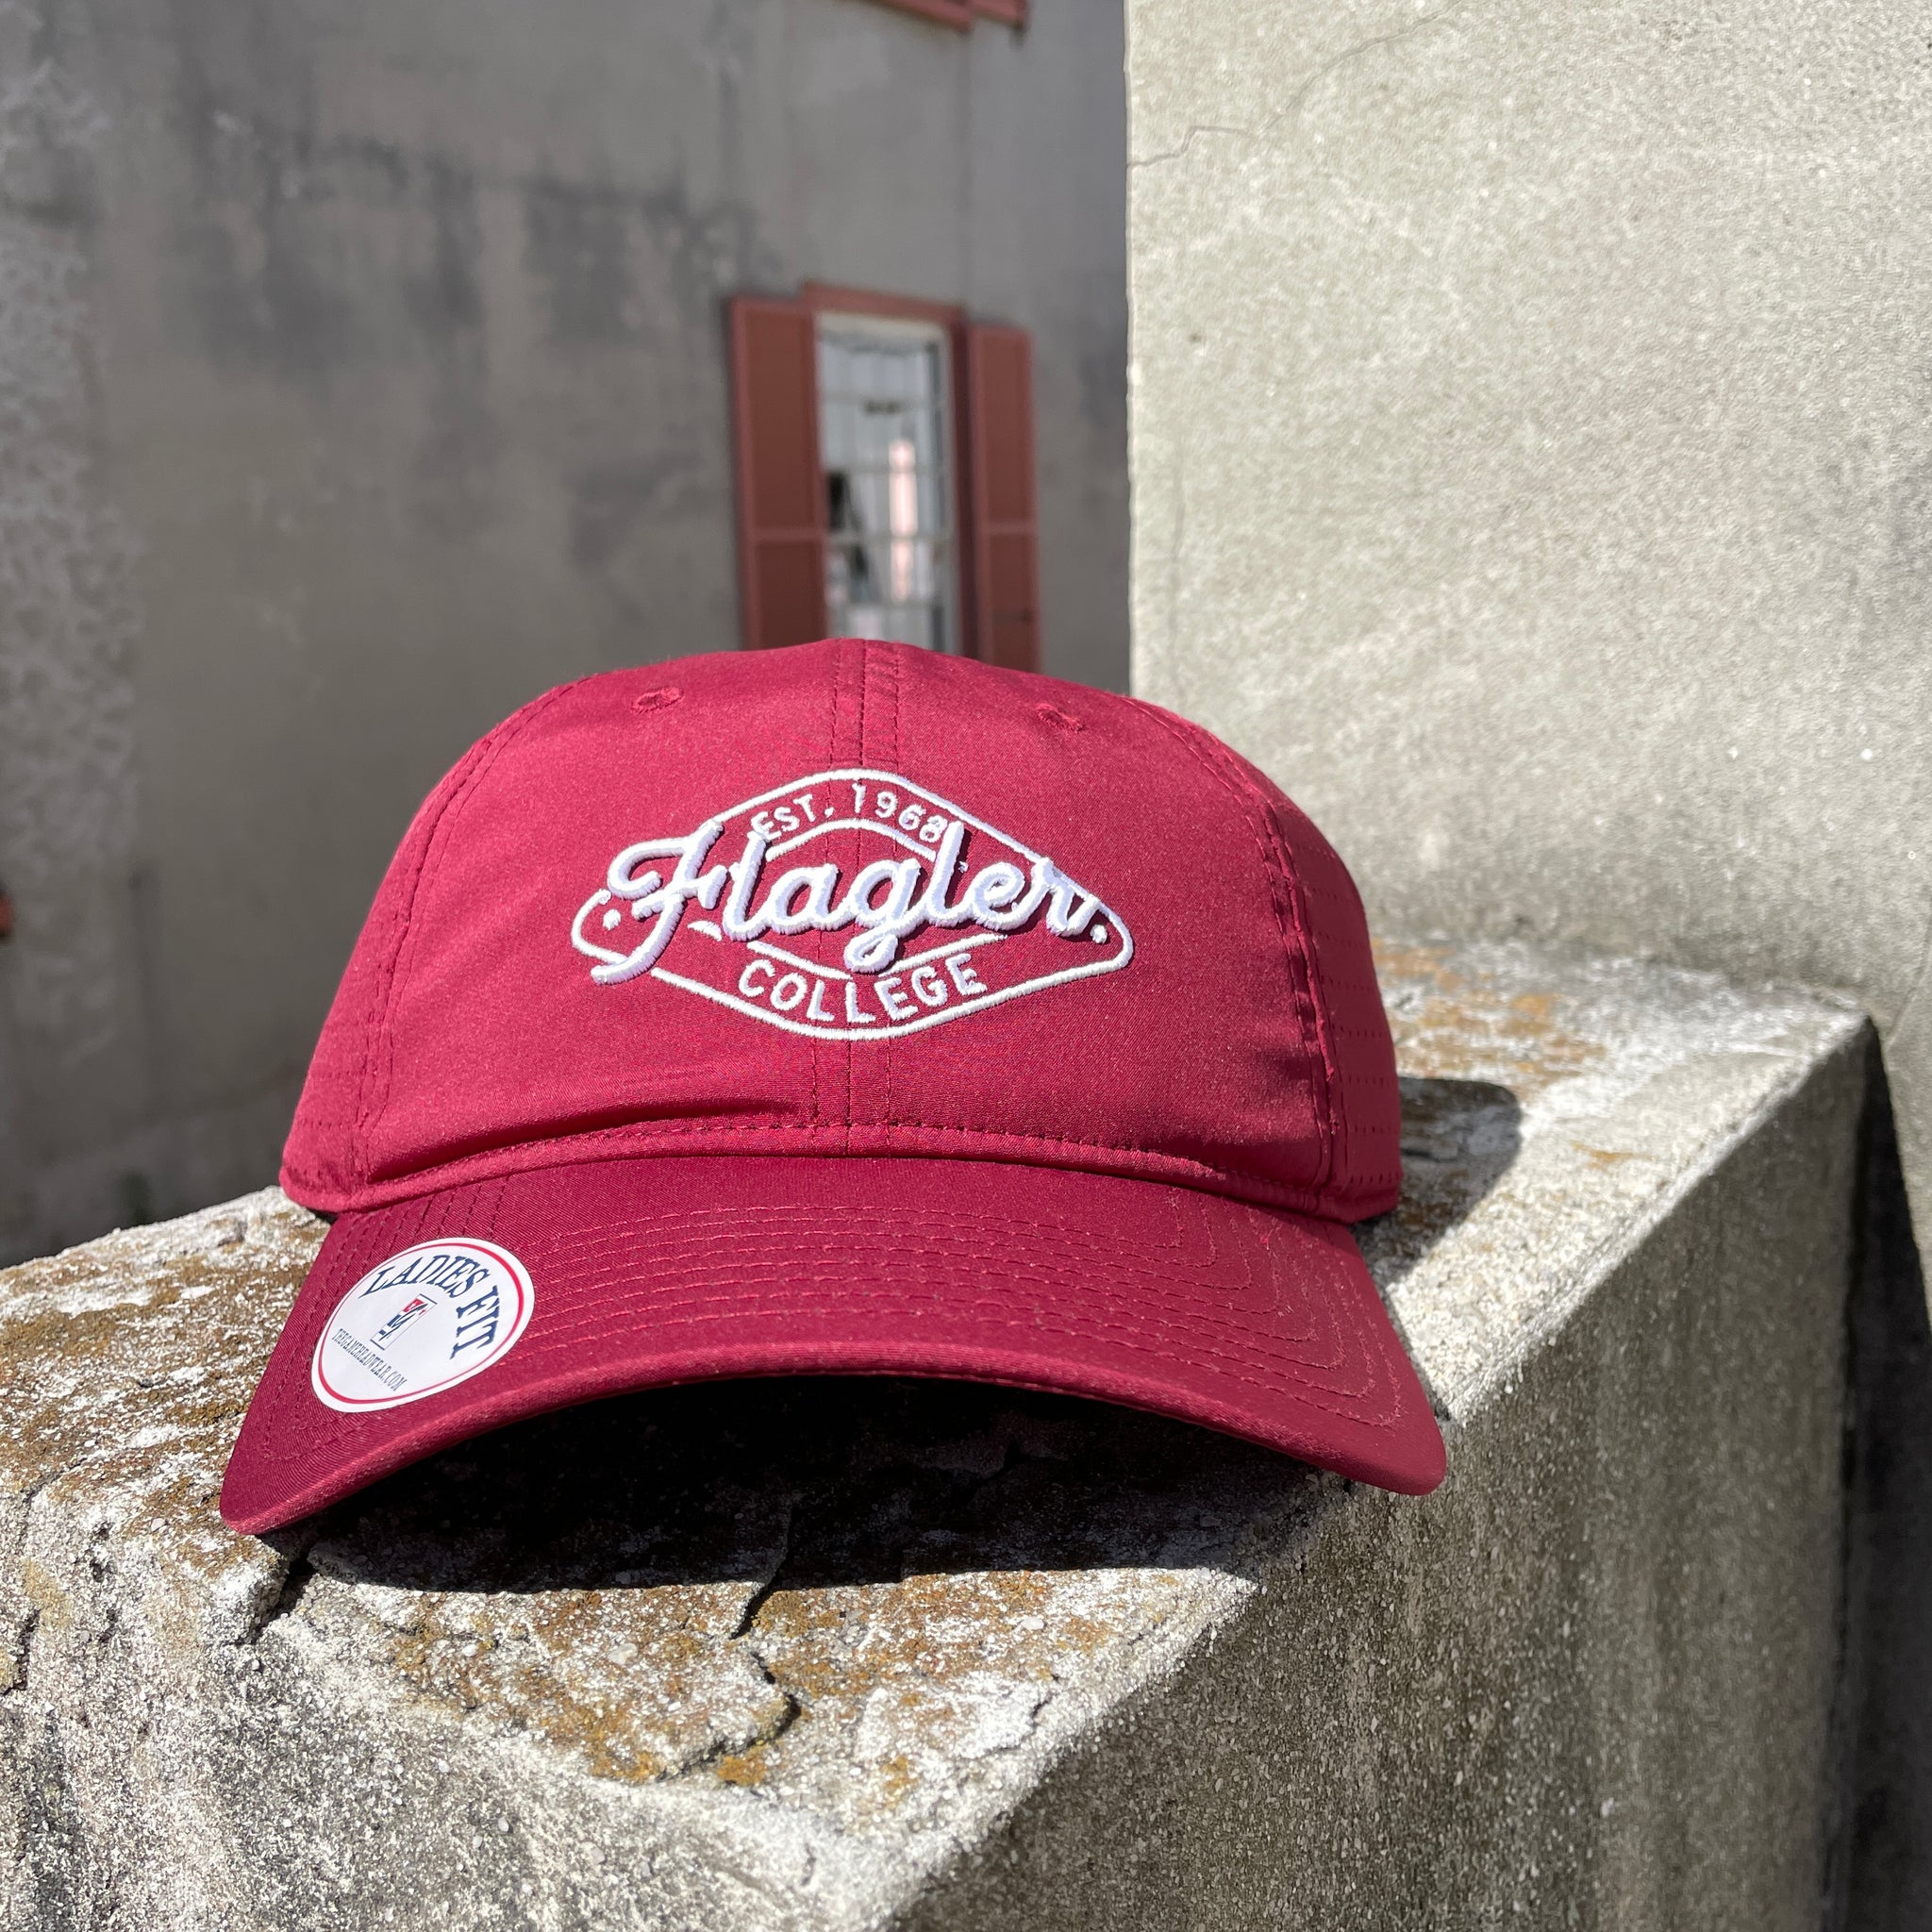 crimson side perforated hat with white letters saying est.1968 over cursive letters saying Flagler over print college all inside white diamond border